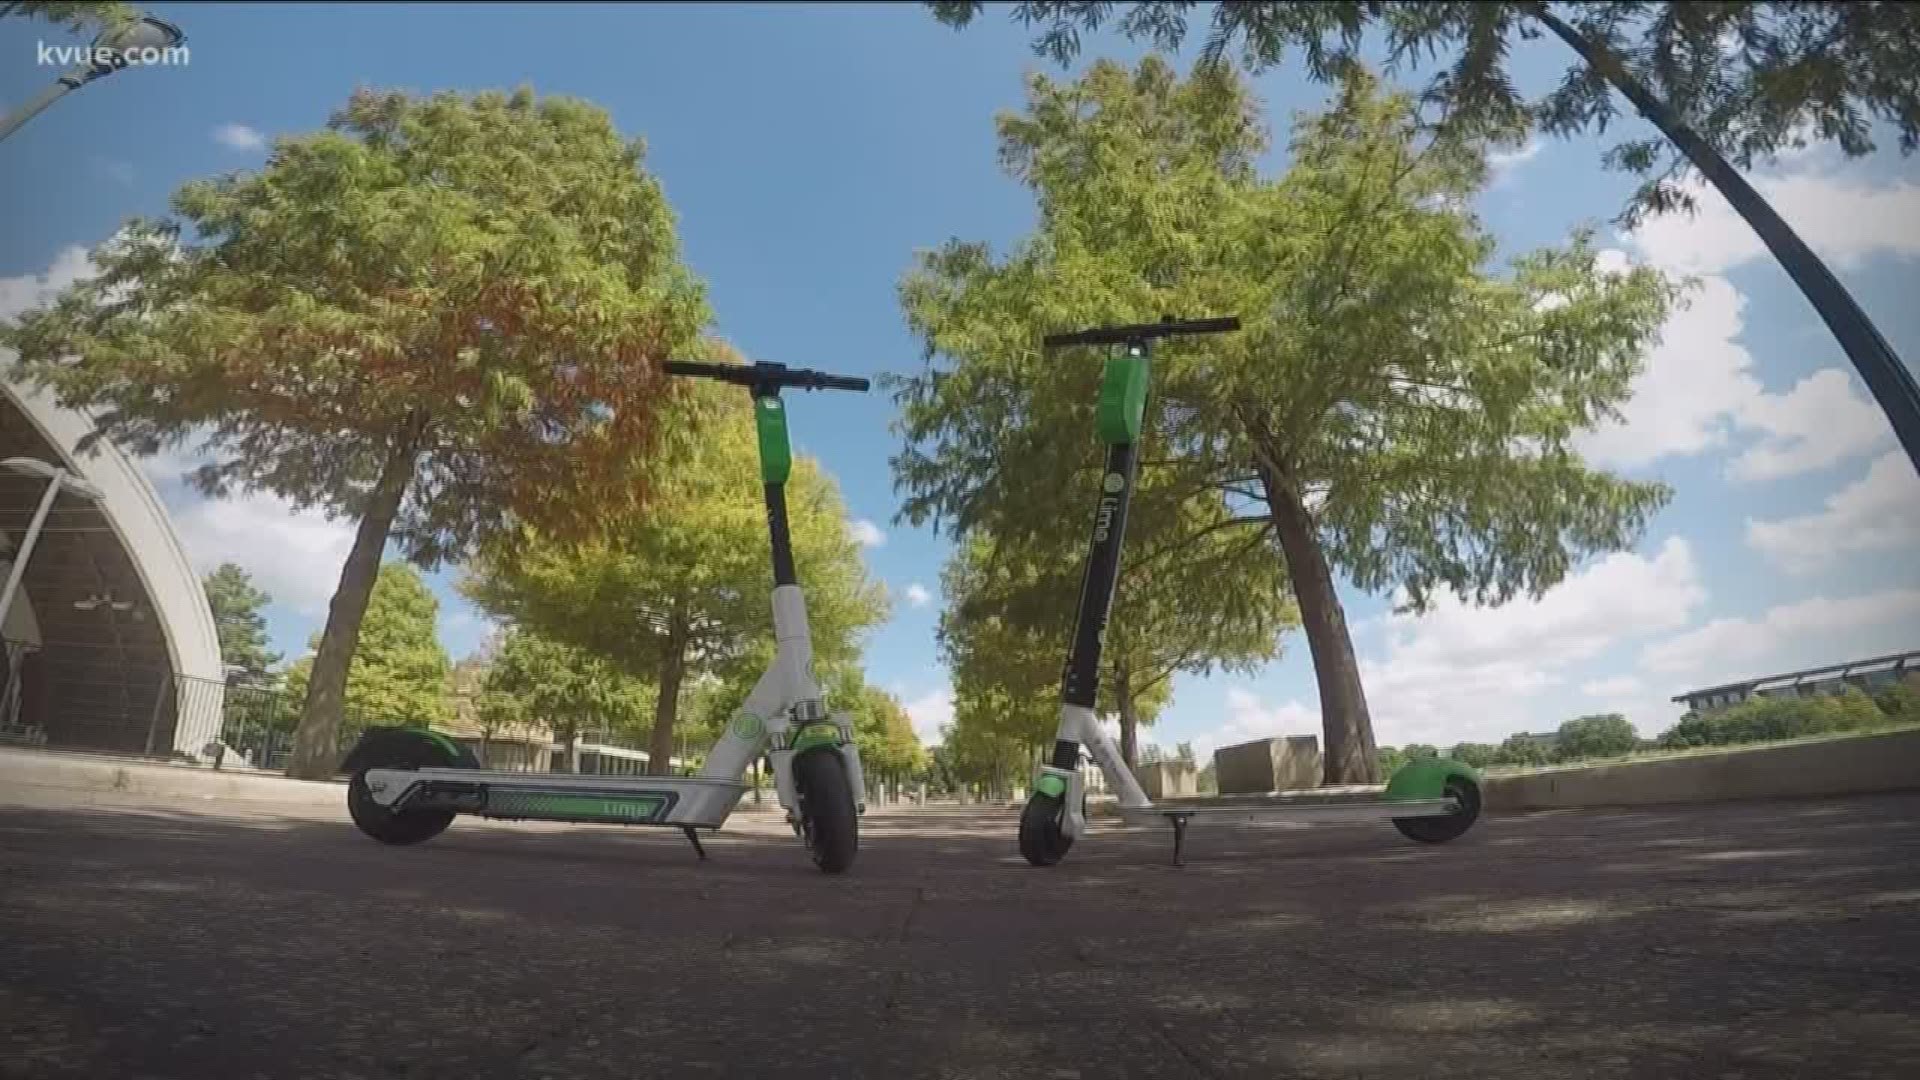 Rebeca Trejo shows us the new features on the latest version of Lime's scooters.